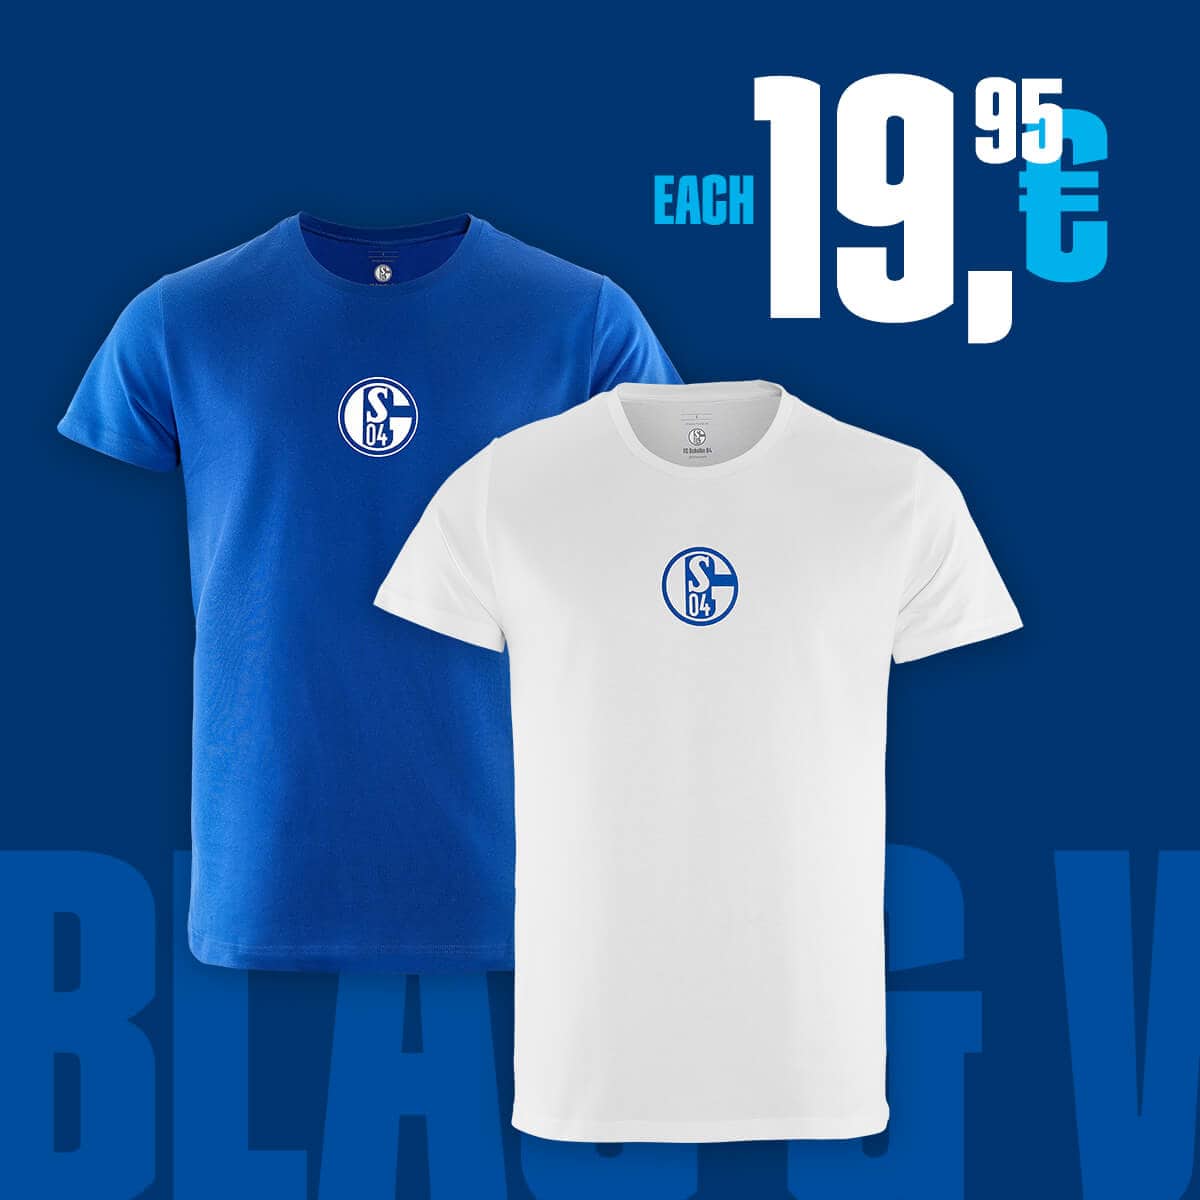 blue and white t-shirts